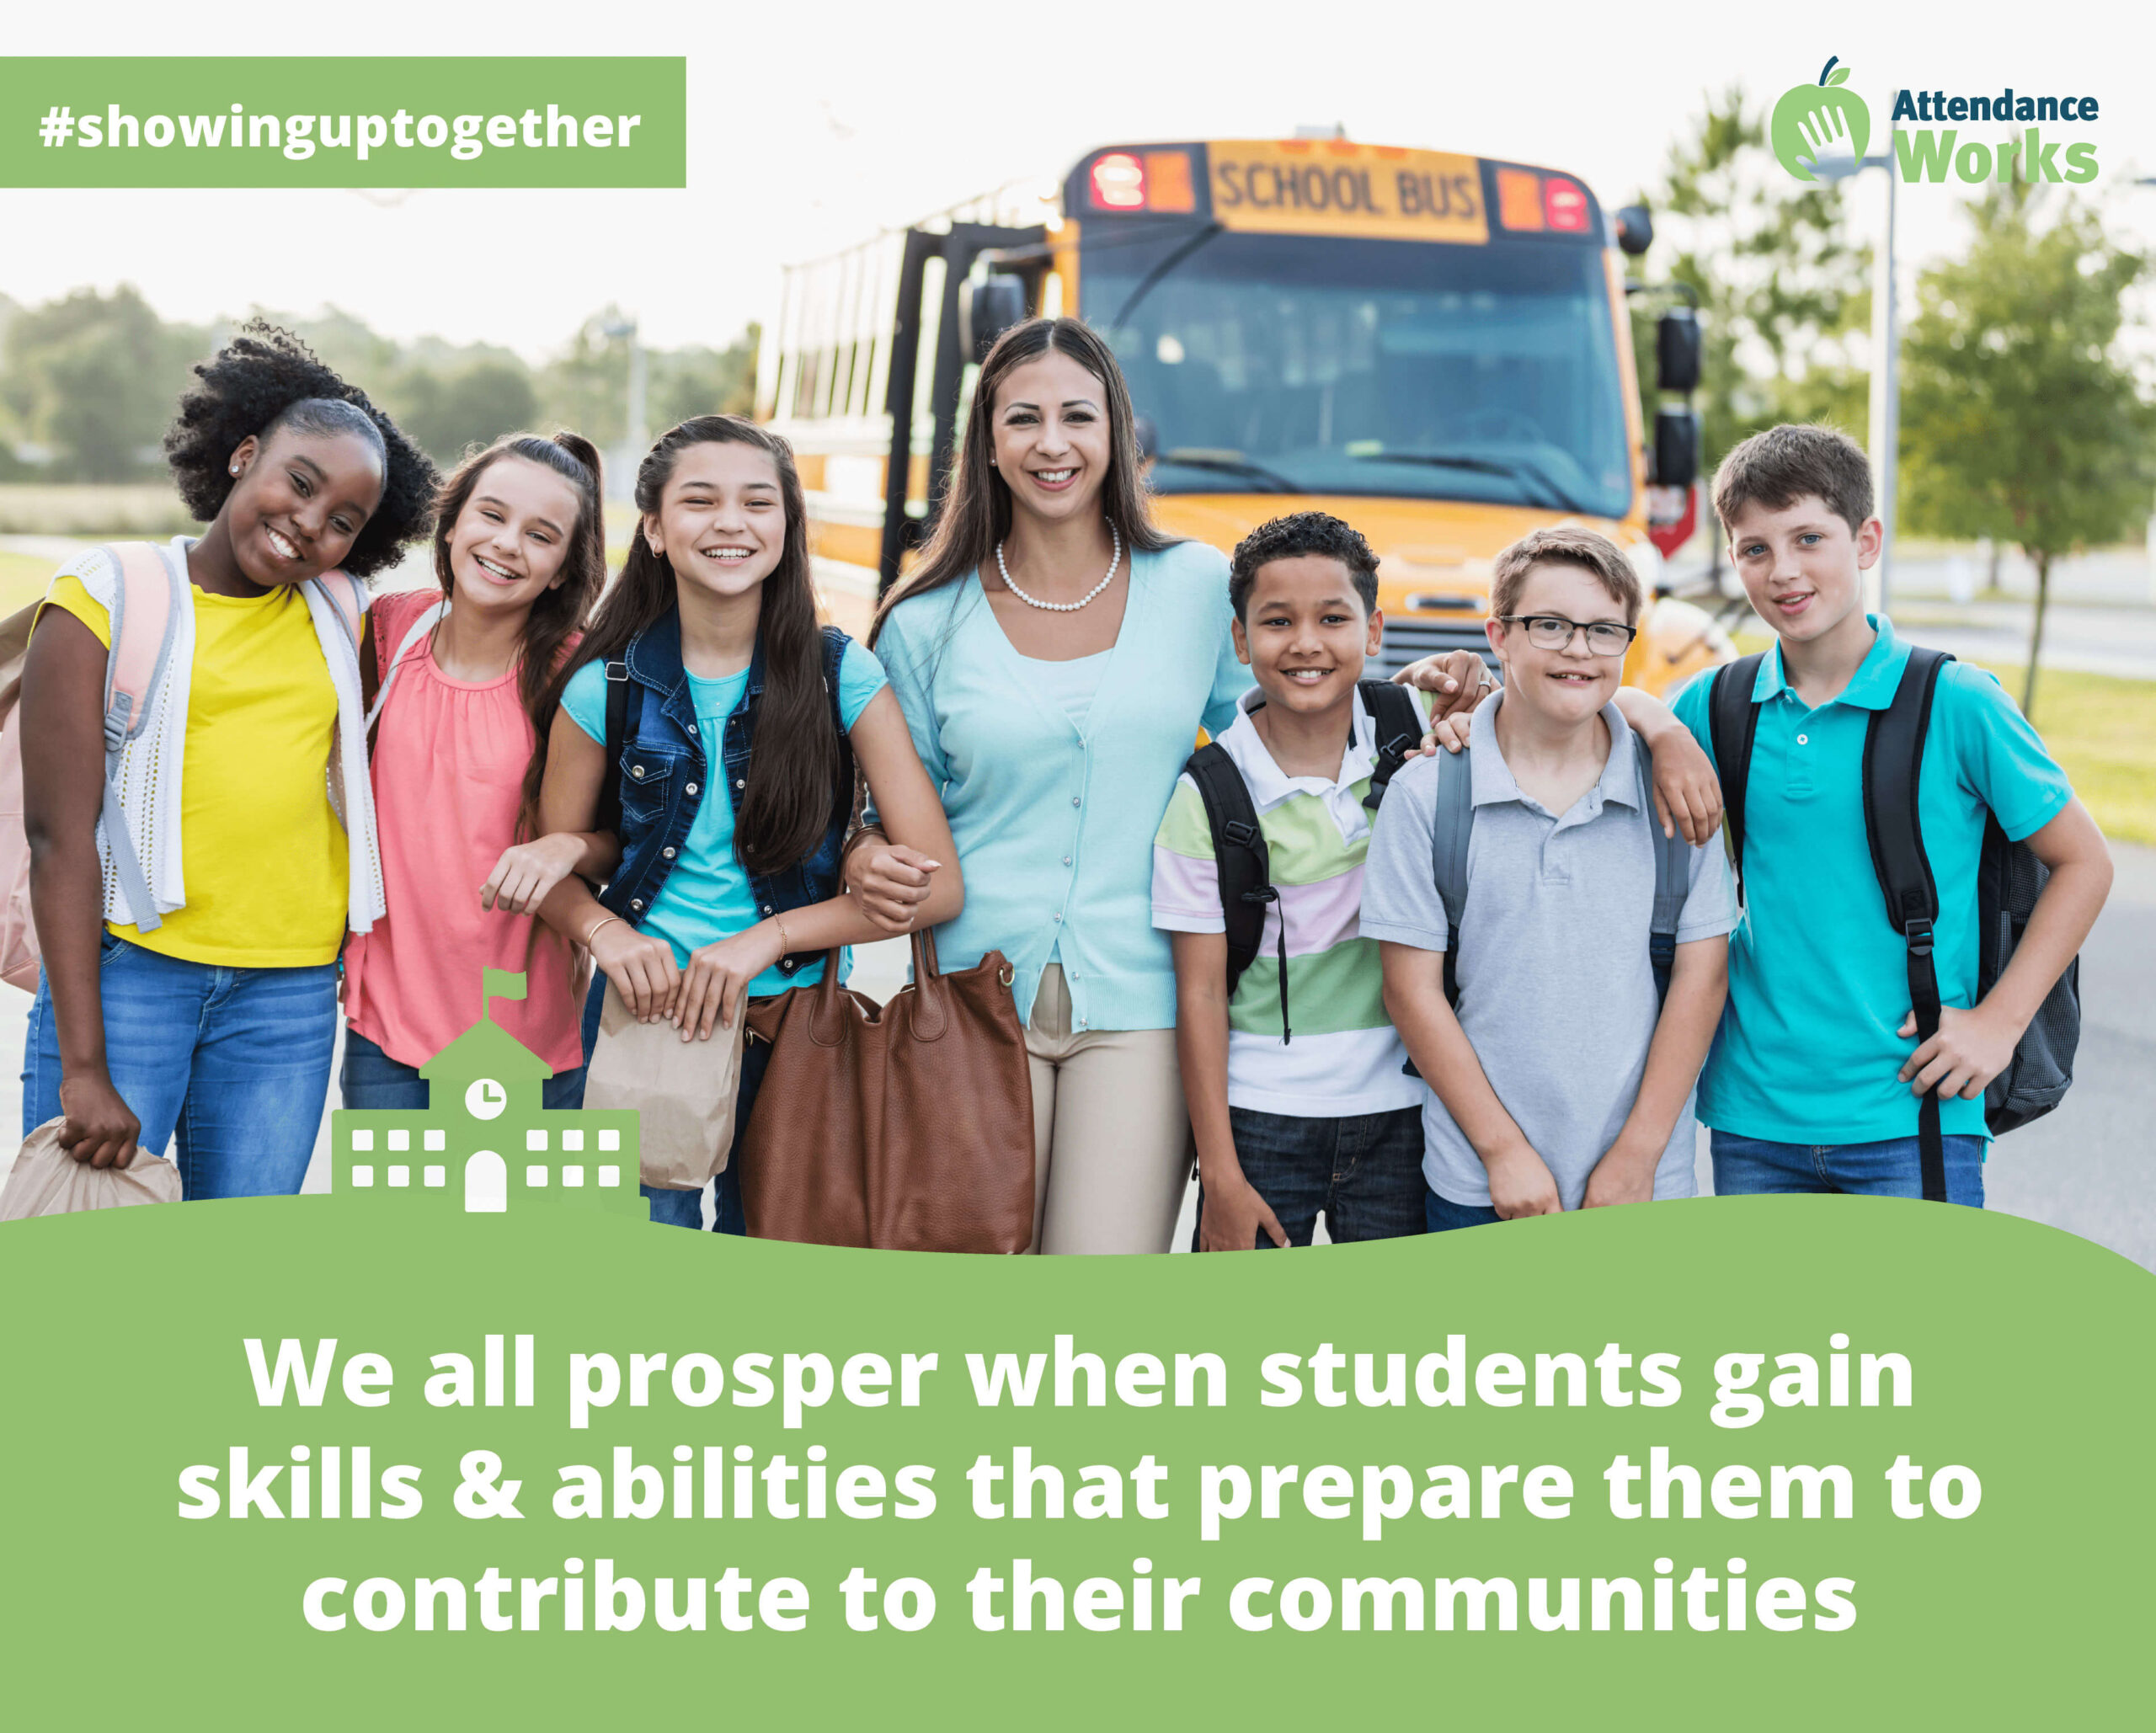 We all prosper when students gain skills & abilities that prepare them to contribute to their communities